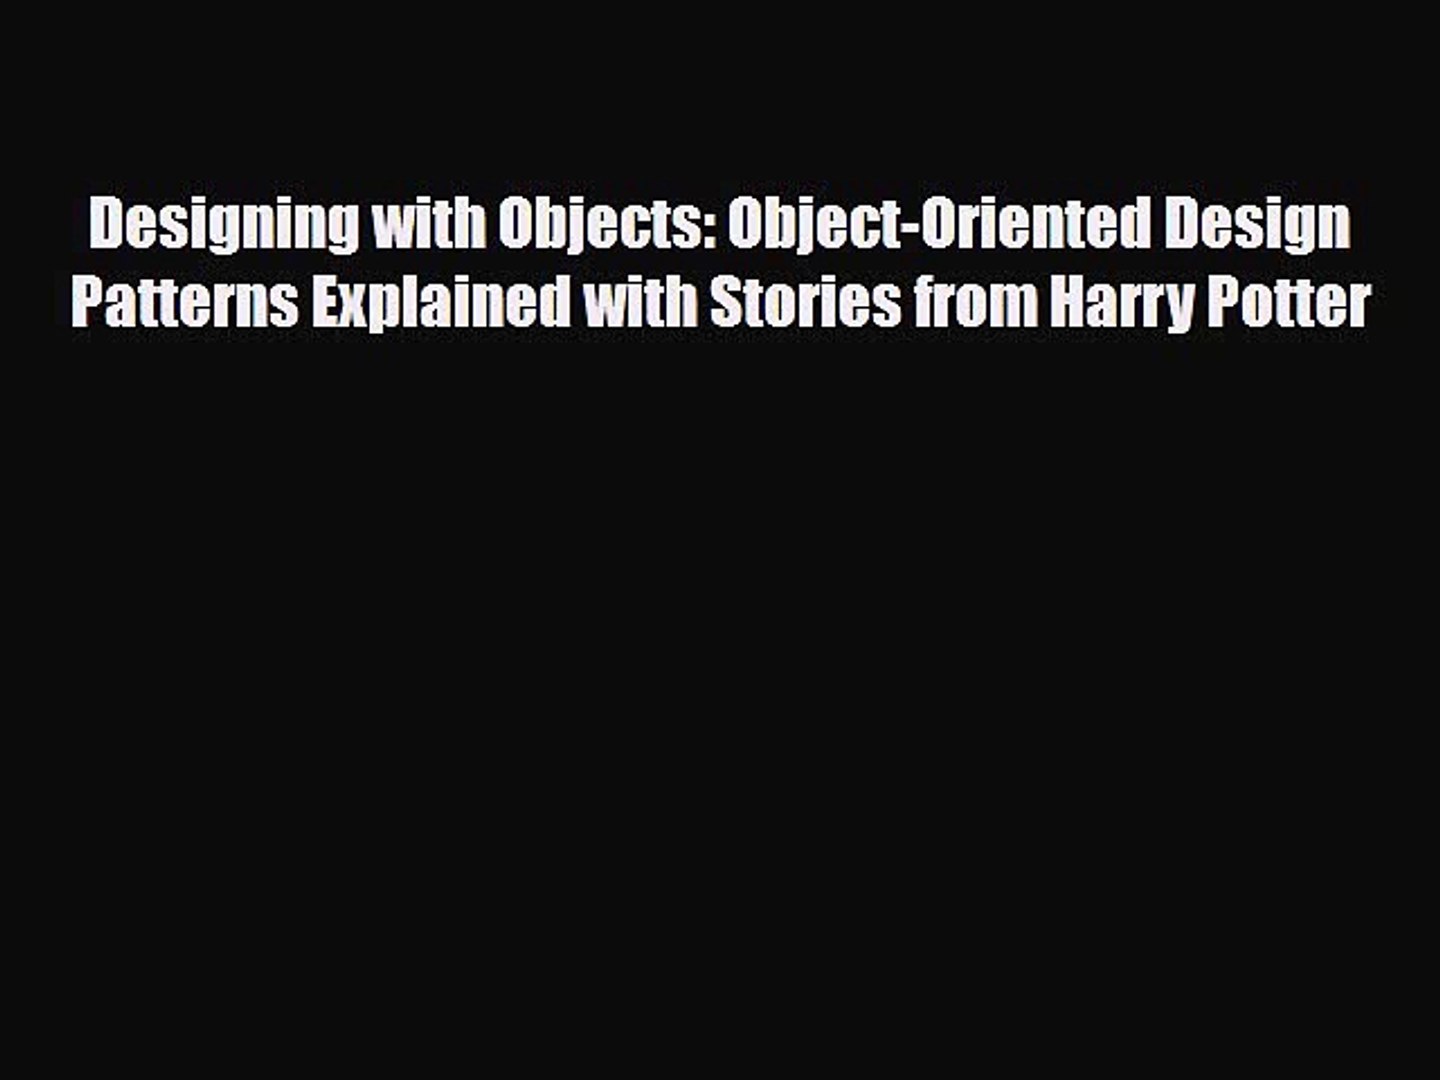 [Download] Designing with Objects: Object-Oriented Design Patterns Explained with Stories from